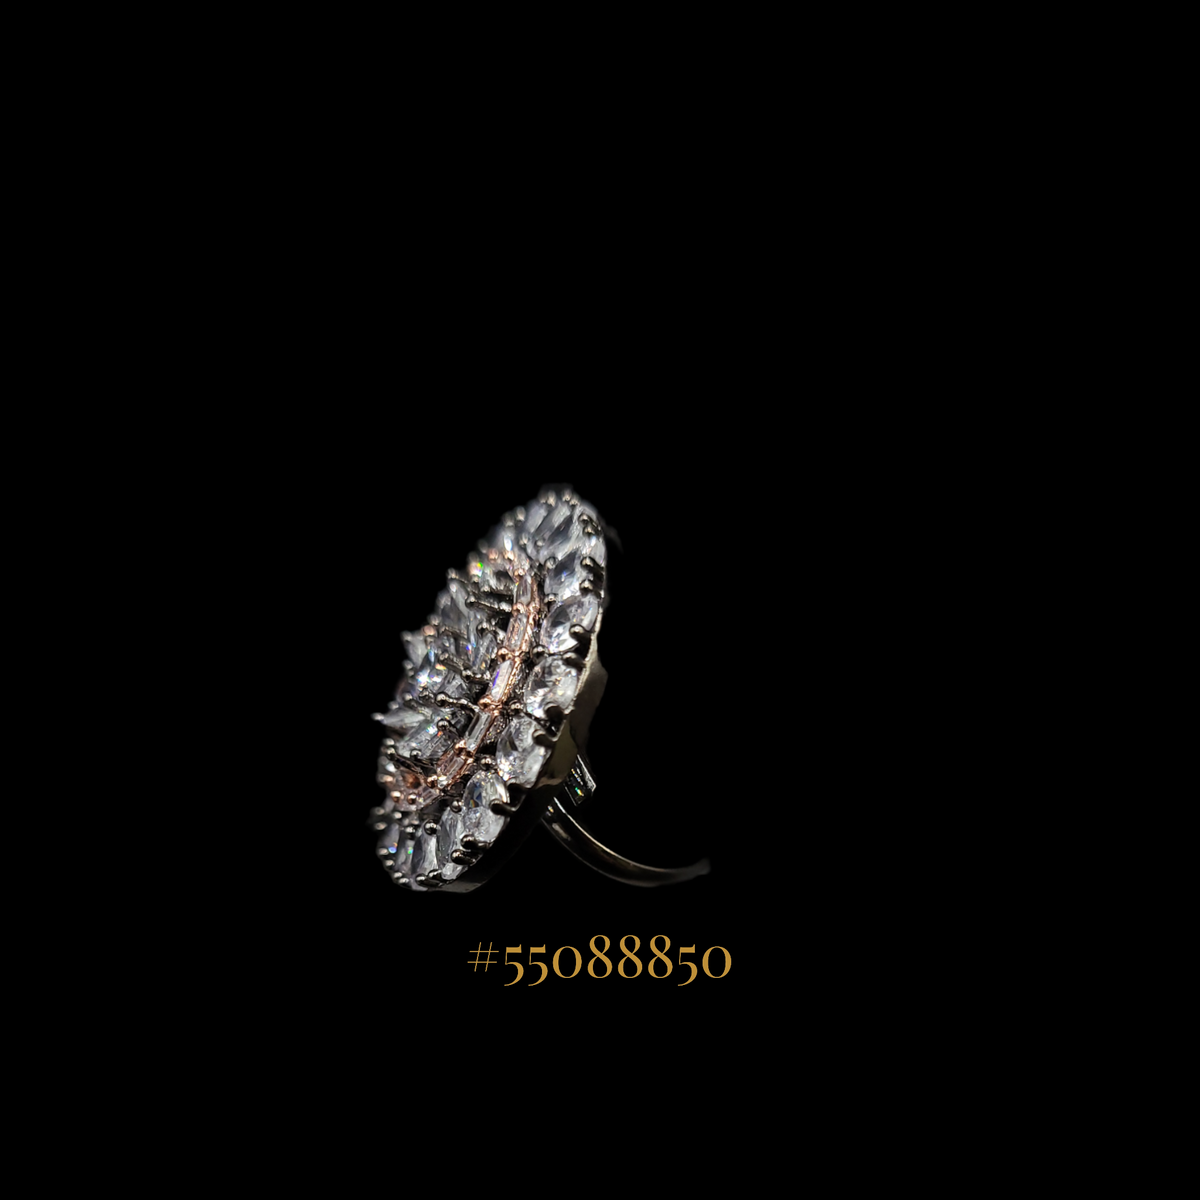 STUNNING DIAMOND DESIGN RING WITH A SMALL TOUCH OF ROSE GOLD.